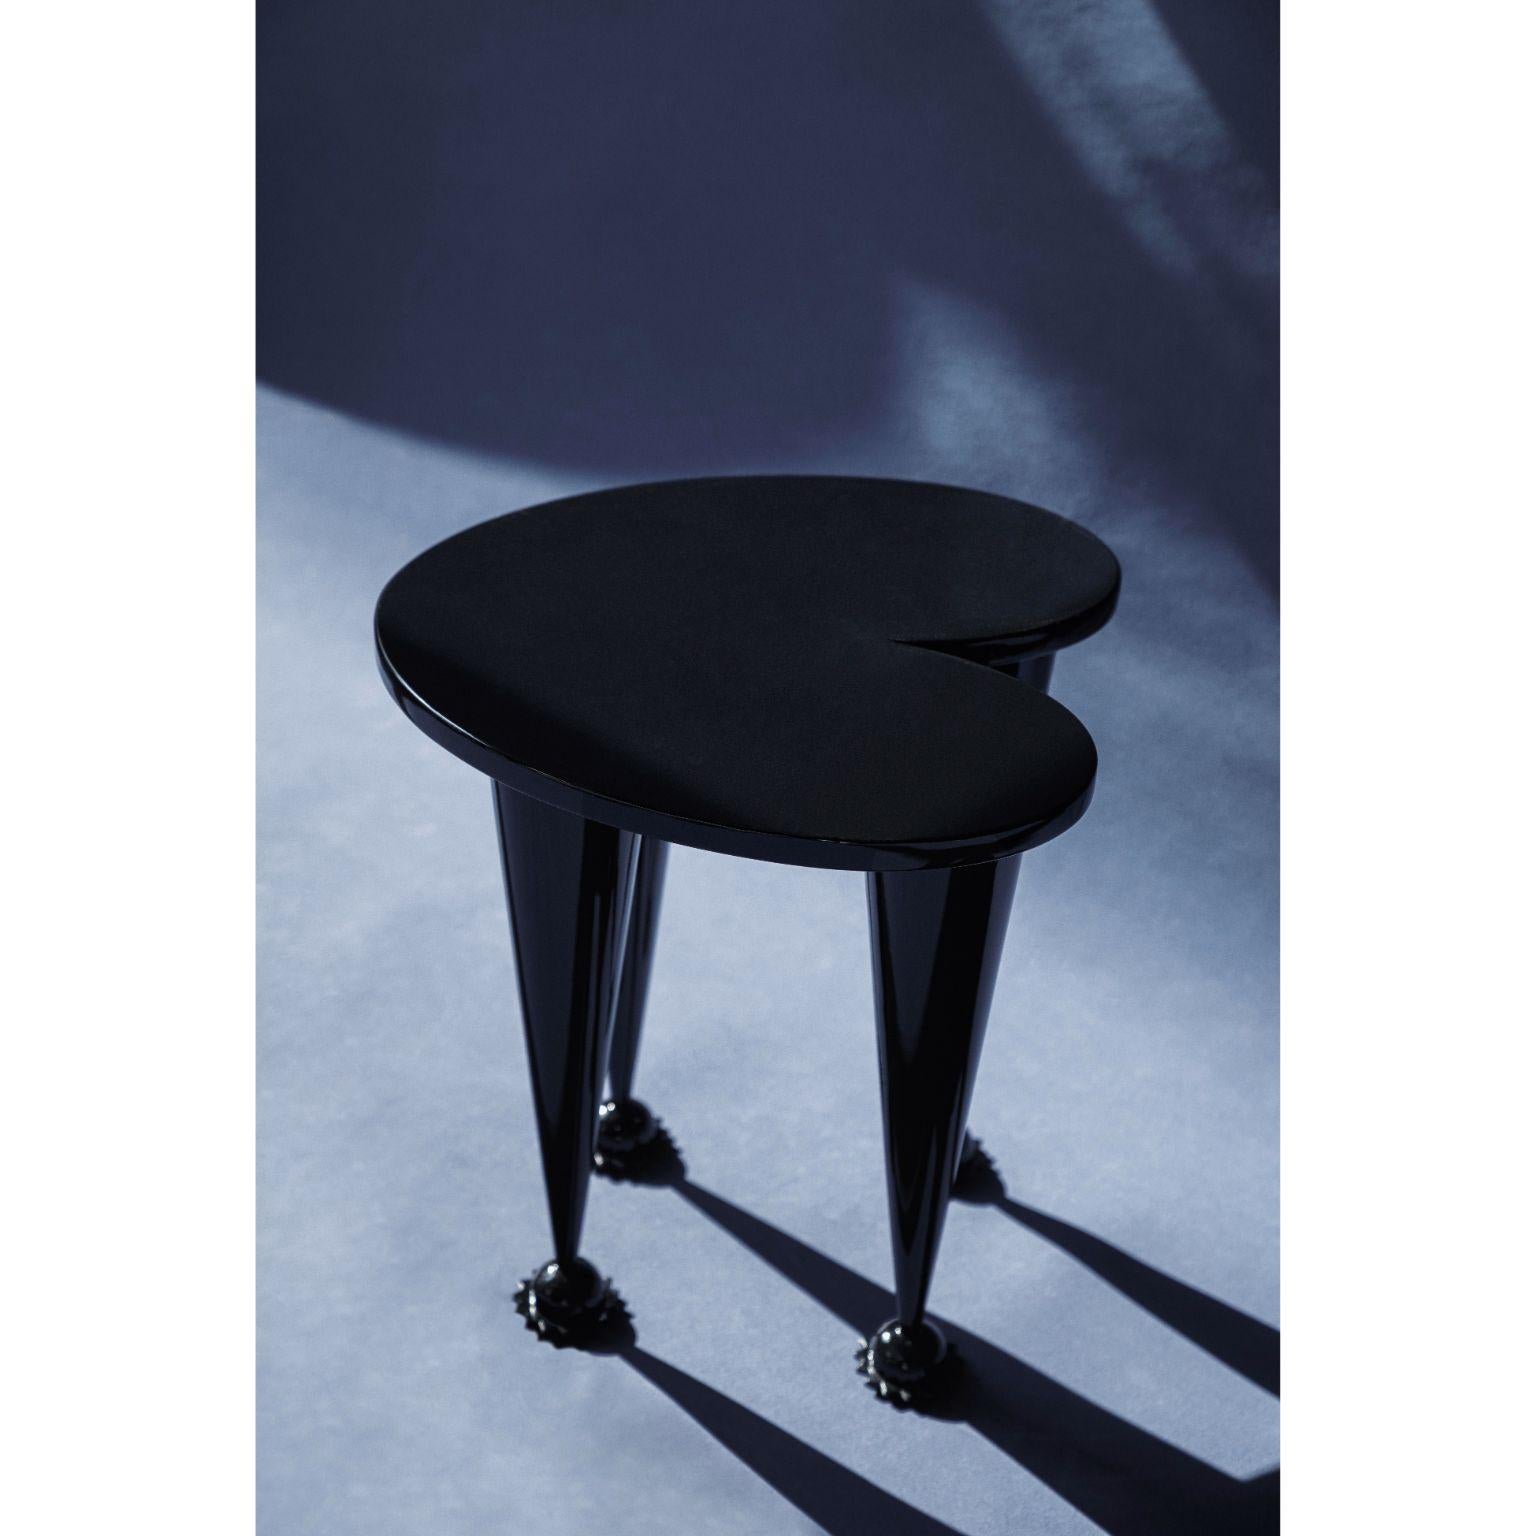 Chinese Set of 2 Burning Memories All Black Stools by the Shaw